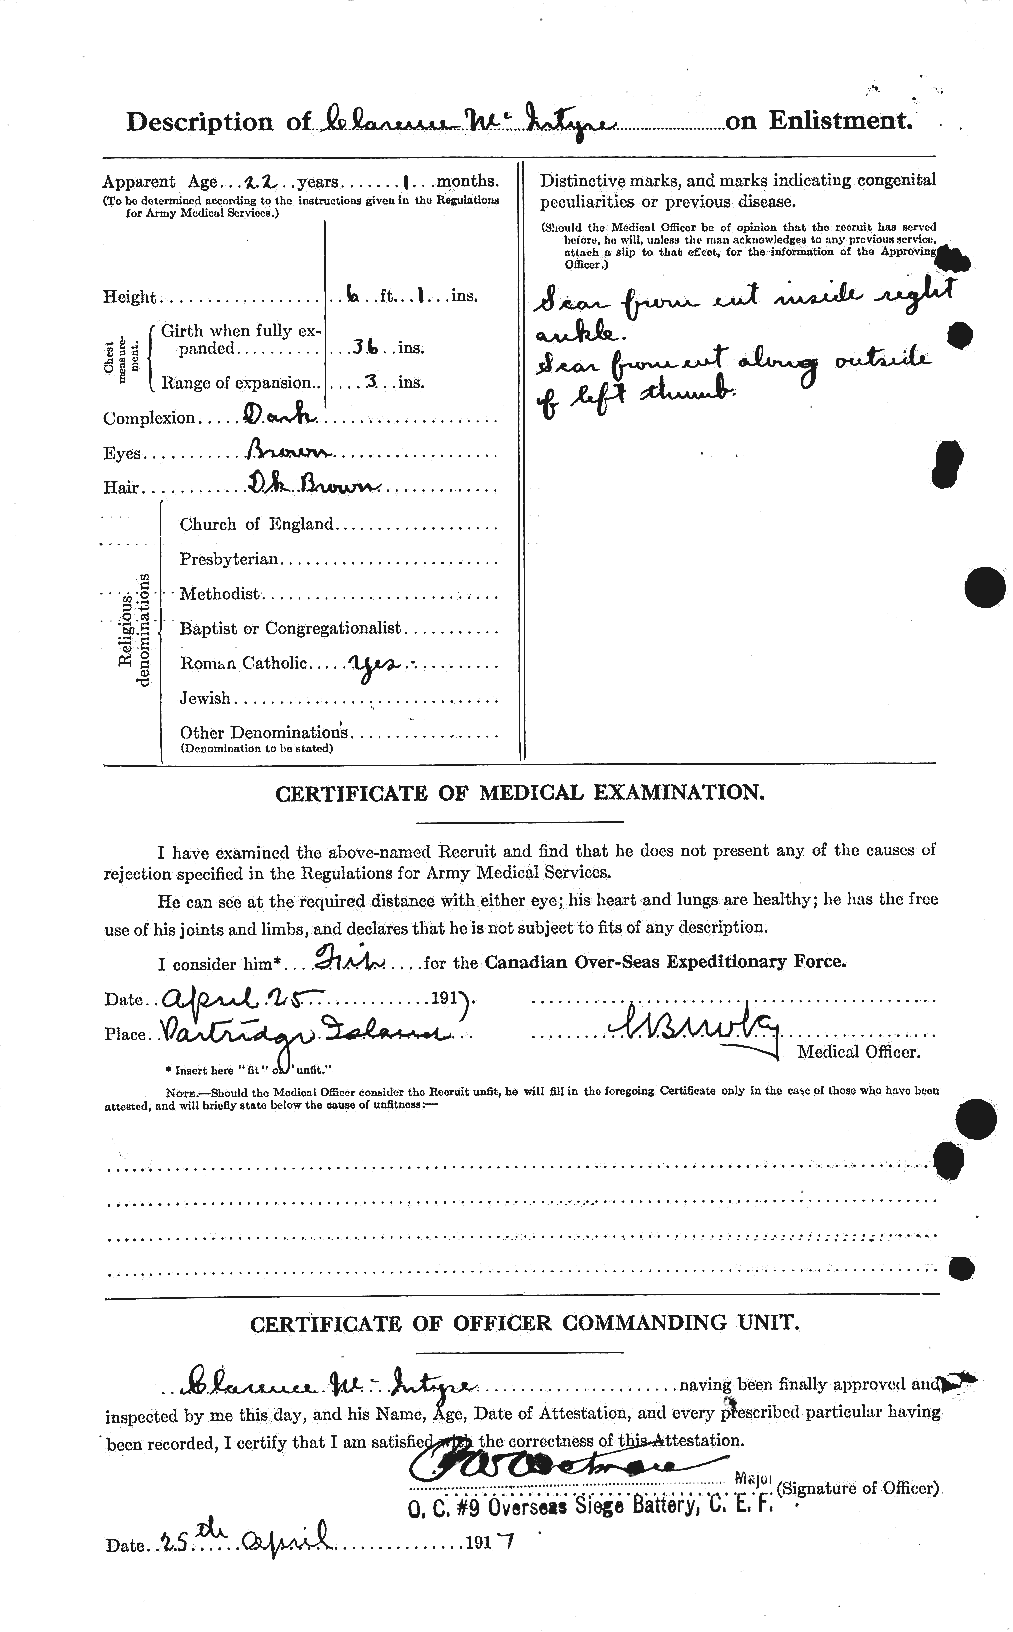 Personnel Records of the First World War - CEF 527281b